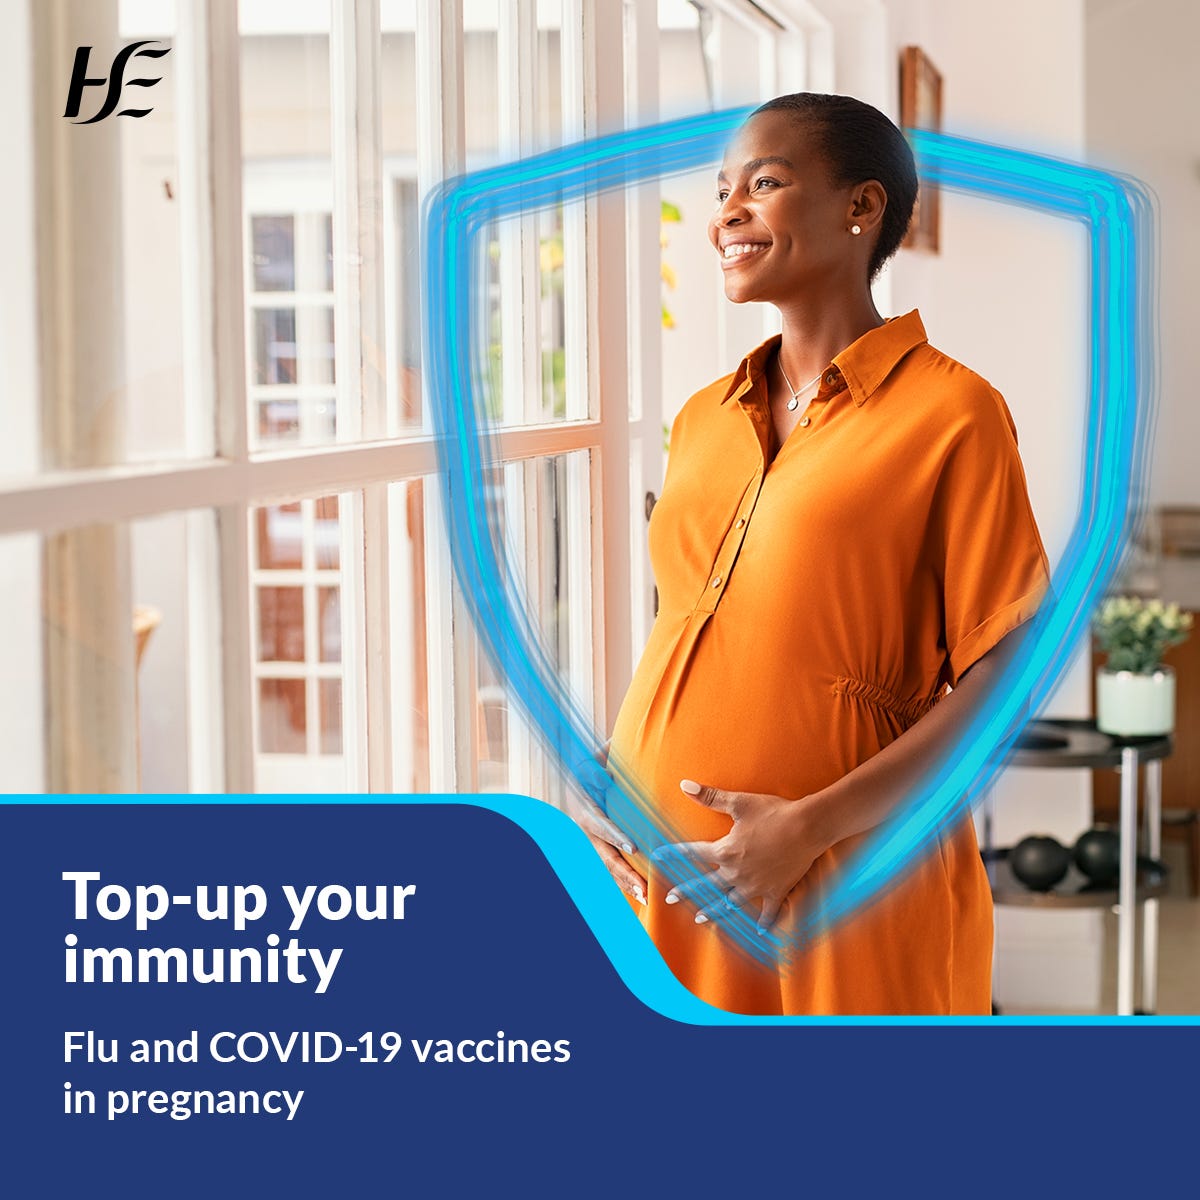 A pregnant woman smiling, there is a blue glowing shield around her. The text in the image says "Top-up your immunity, flu and COVID-19 vaccines in pregnancy".